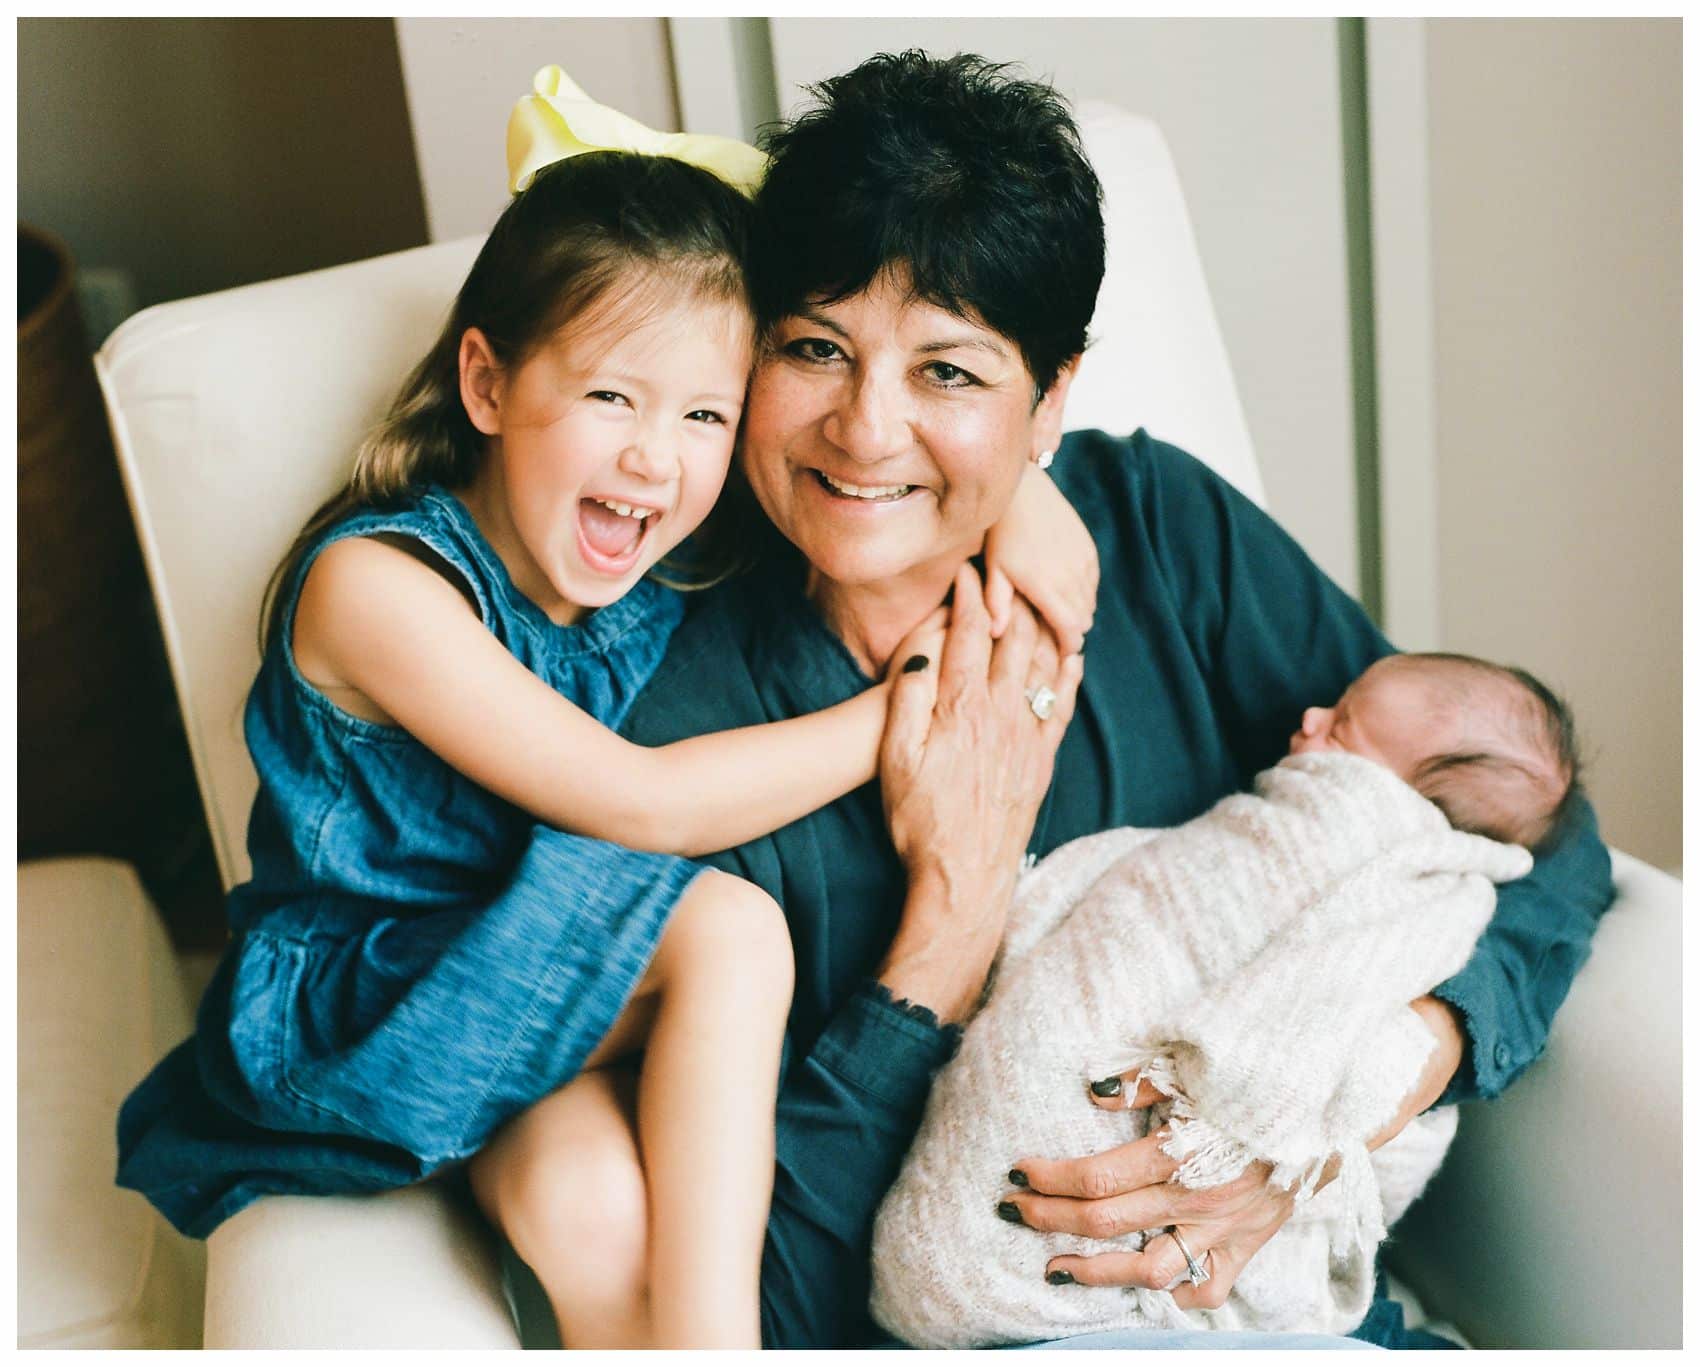 NYC Newborn Photographer Miriam Dubinsky shares best gift ideas for Mother's Day of a family portrait with grandmother hugging her grandkids